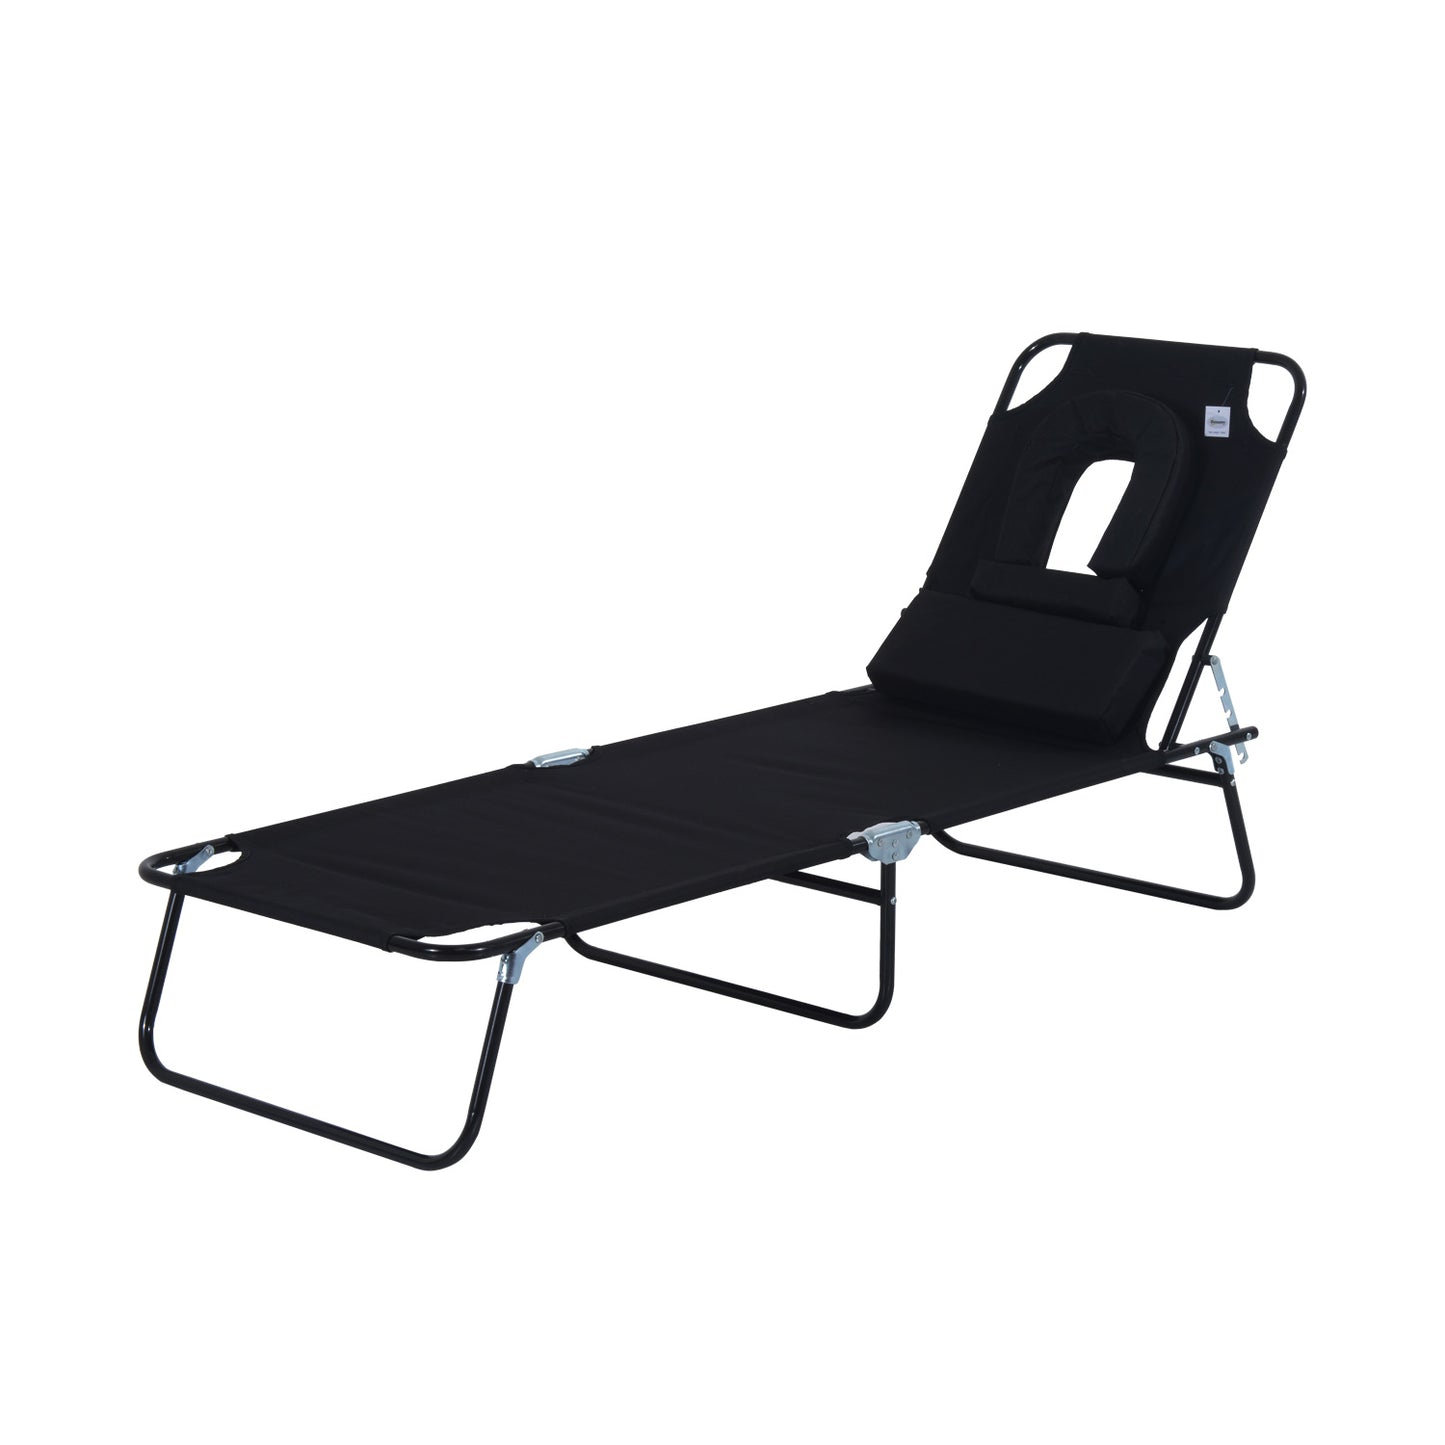 Outsunny Adjustable Sun Lounger W/Pillow-Black